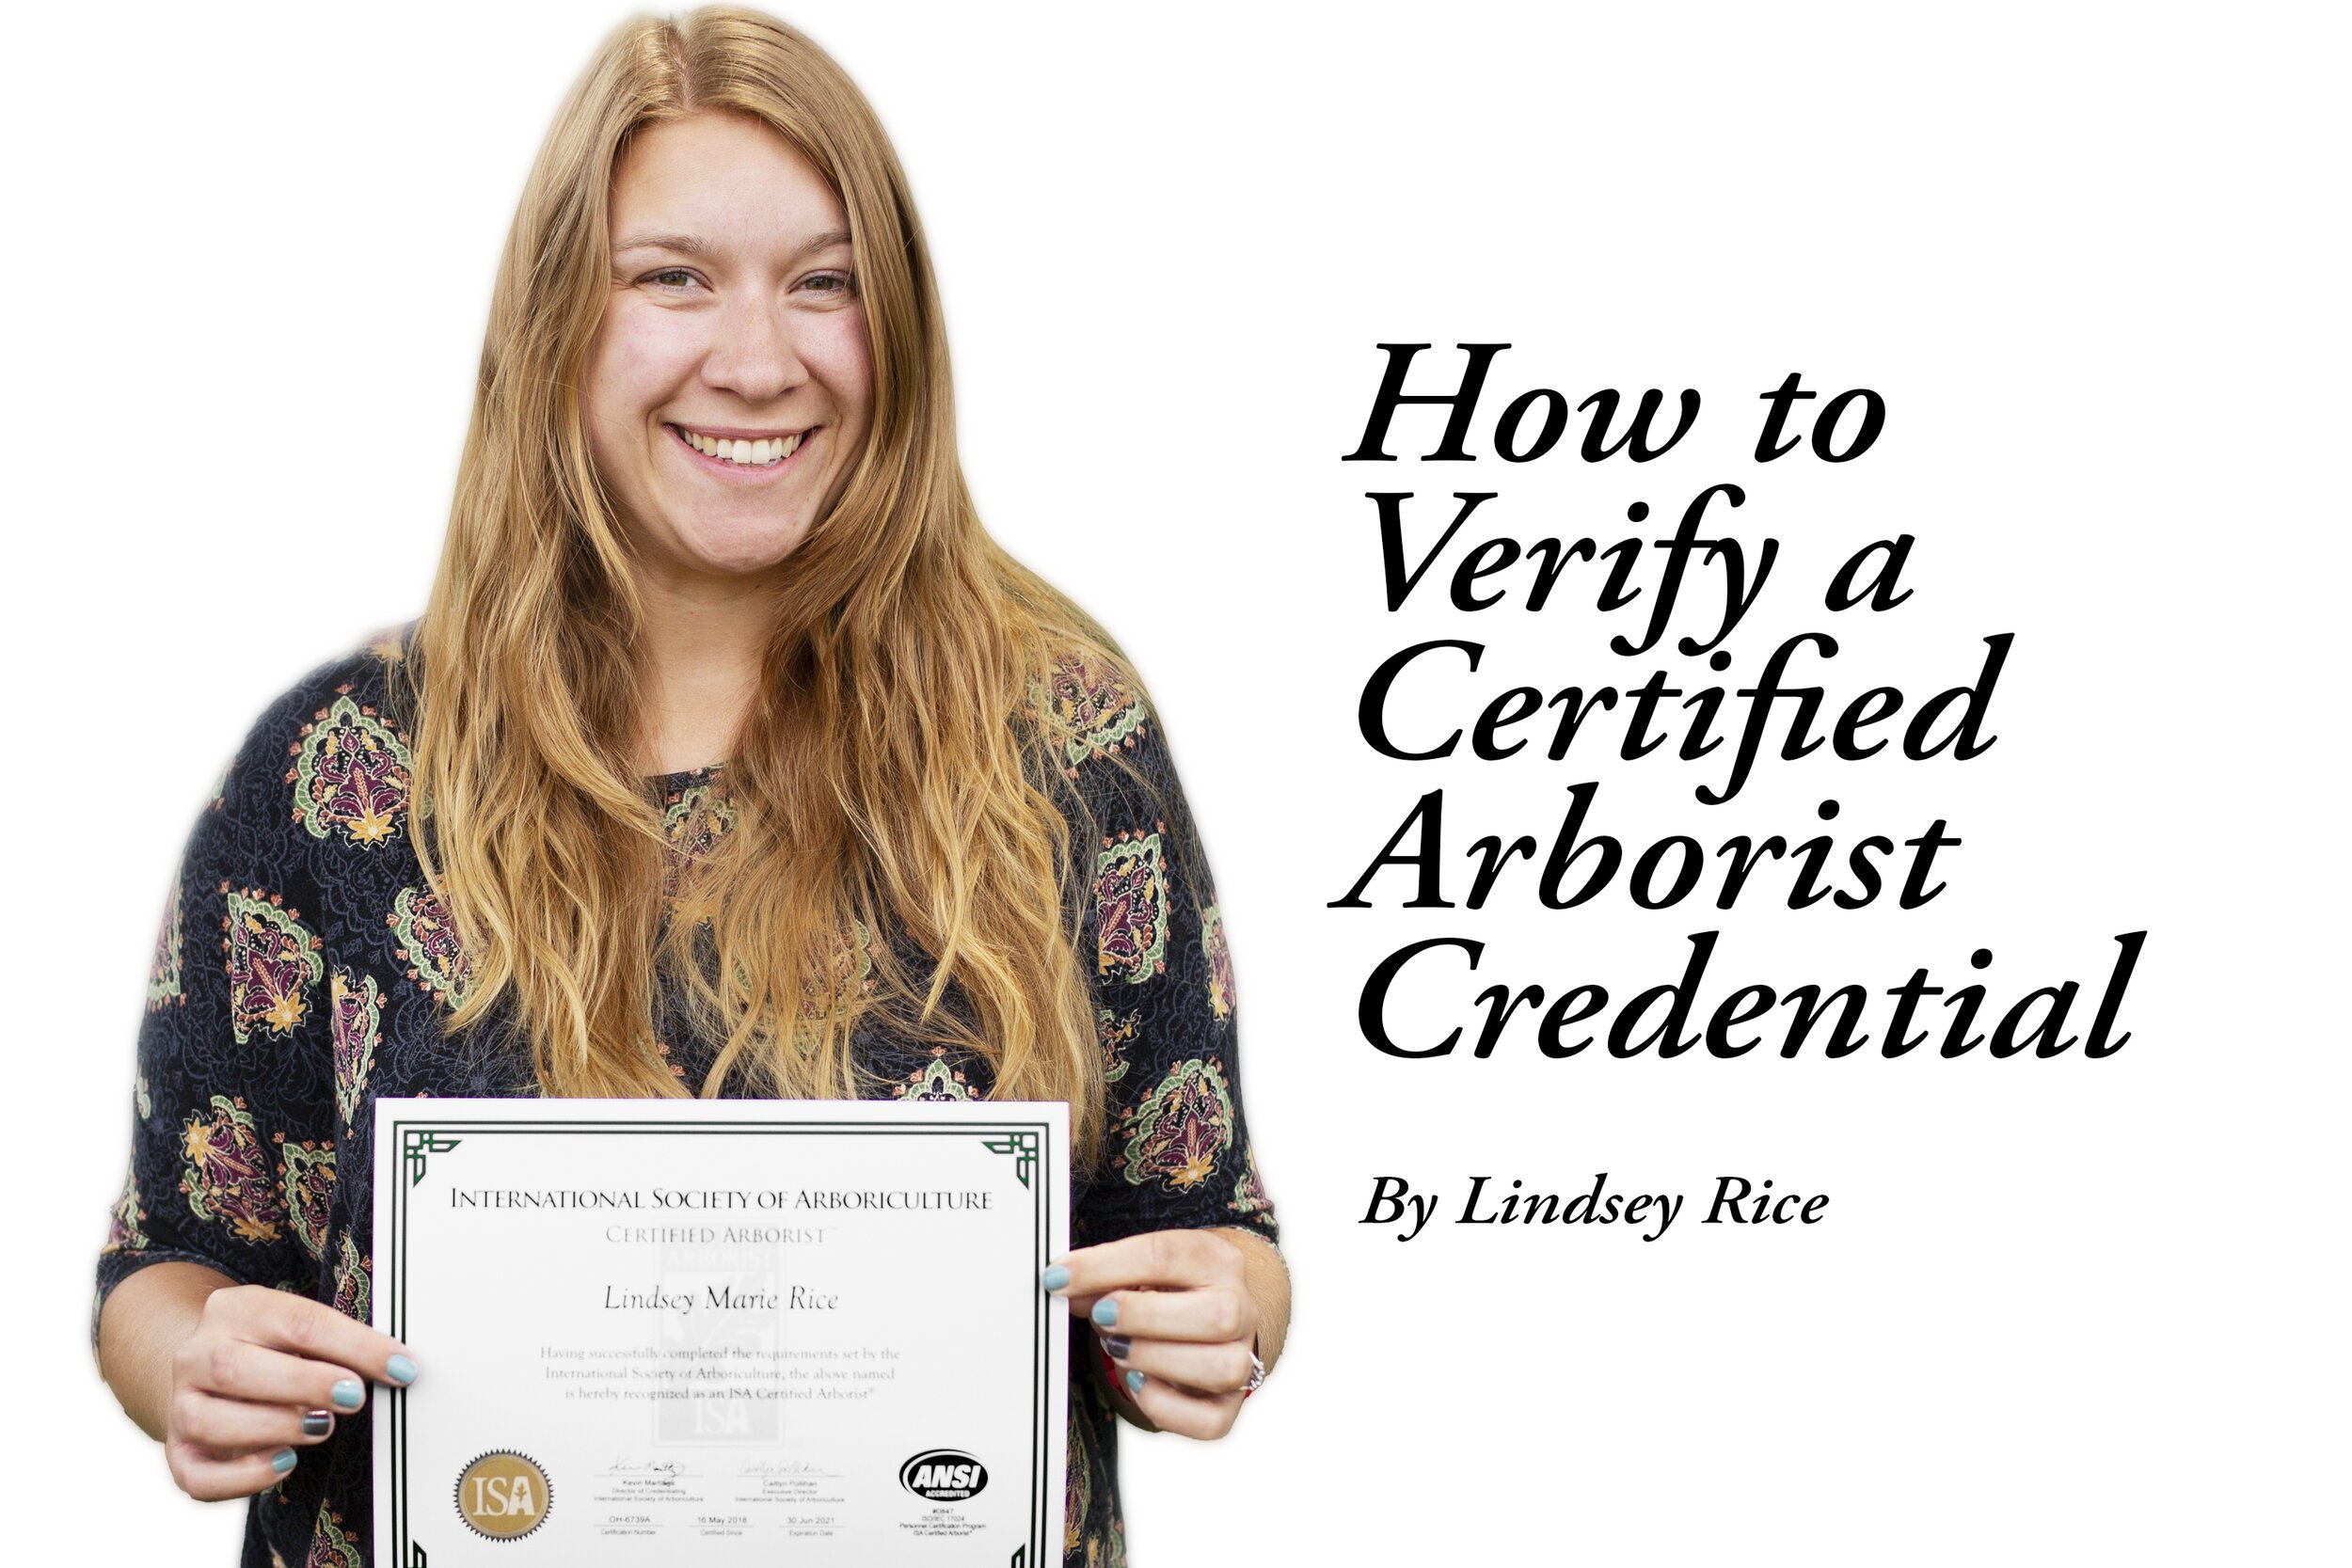 How to Verify a Certified Arborist Credential.jpeg